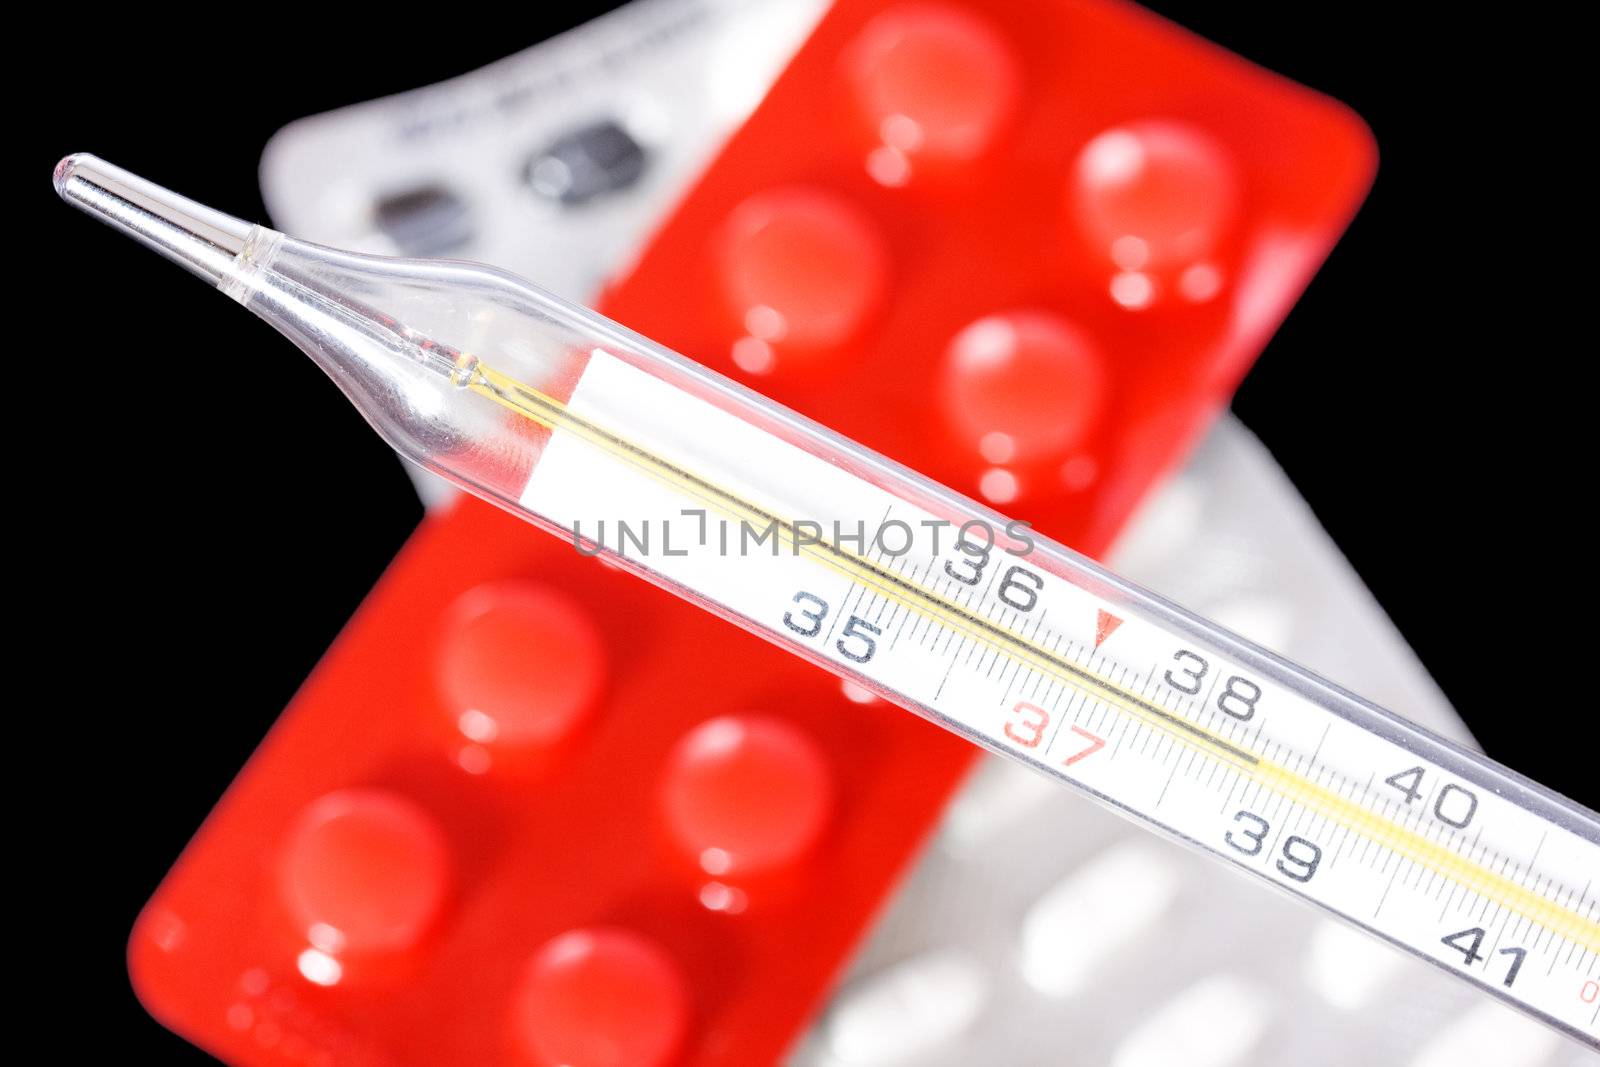 Thermometer and pills on black background